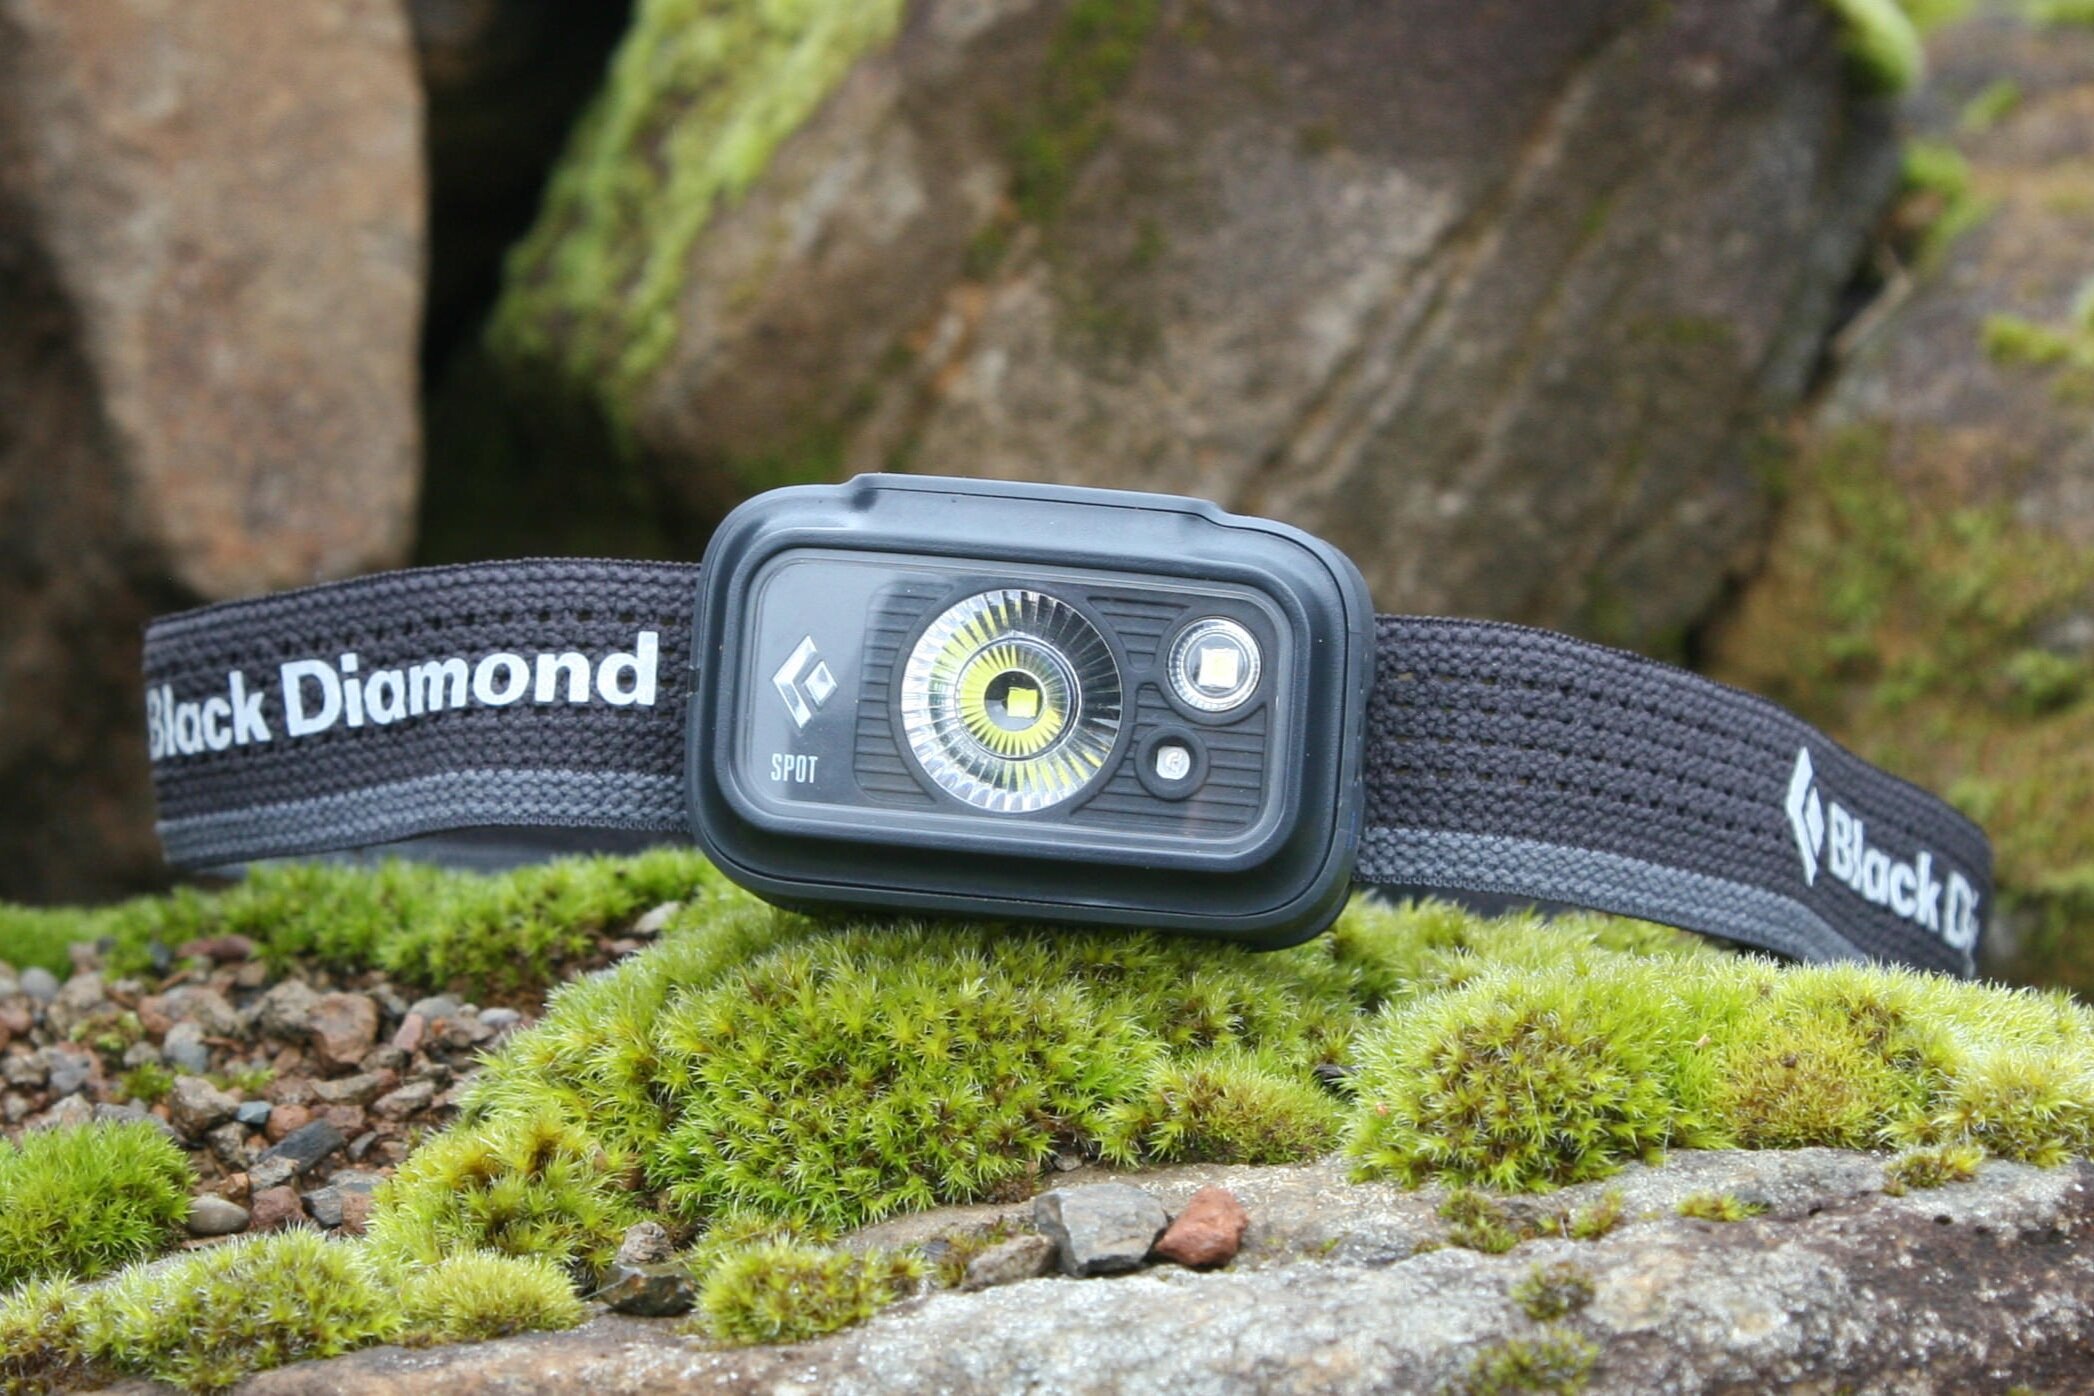 the Black Diamond Spot 350 is bright, easy to use, and has excellent battery life making it a great value